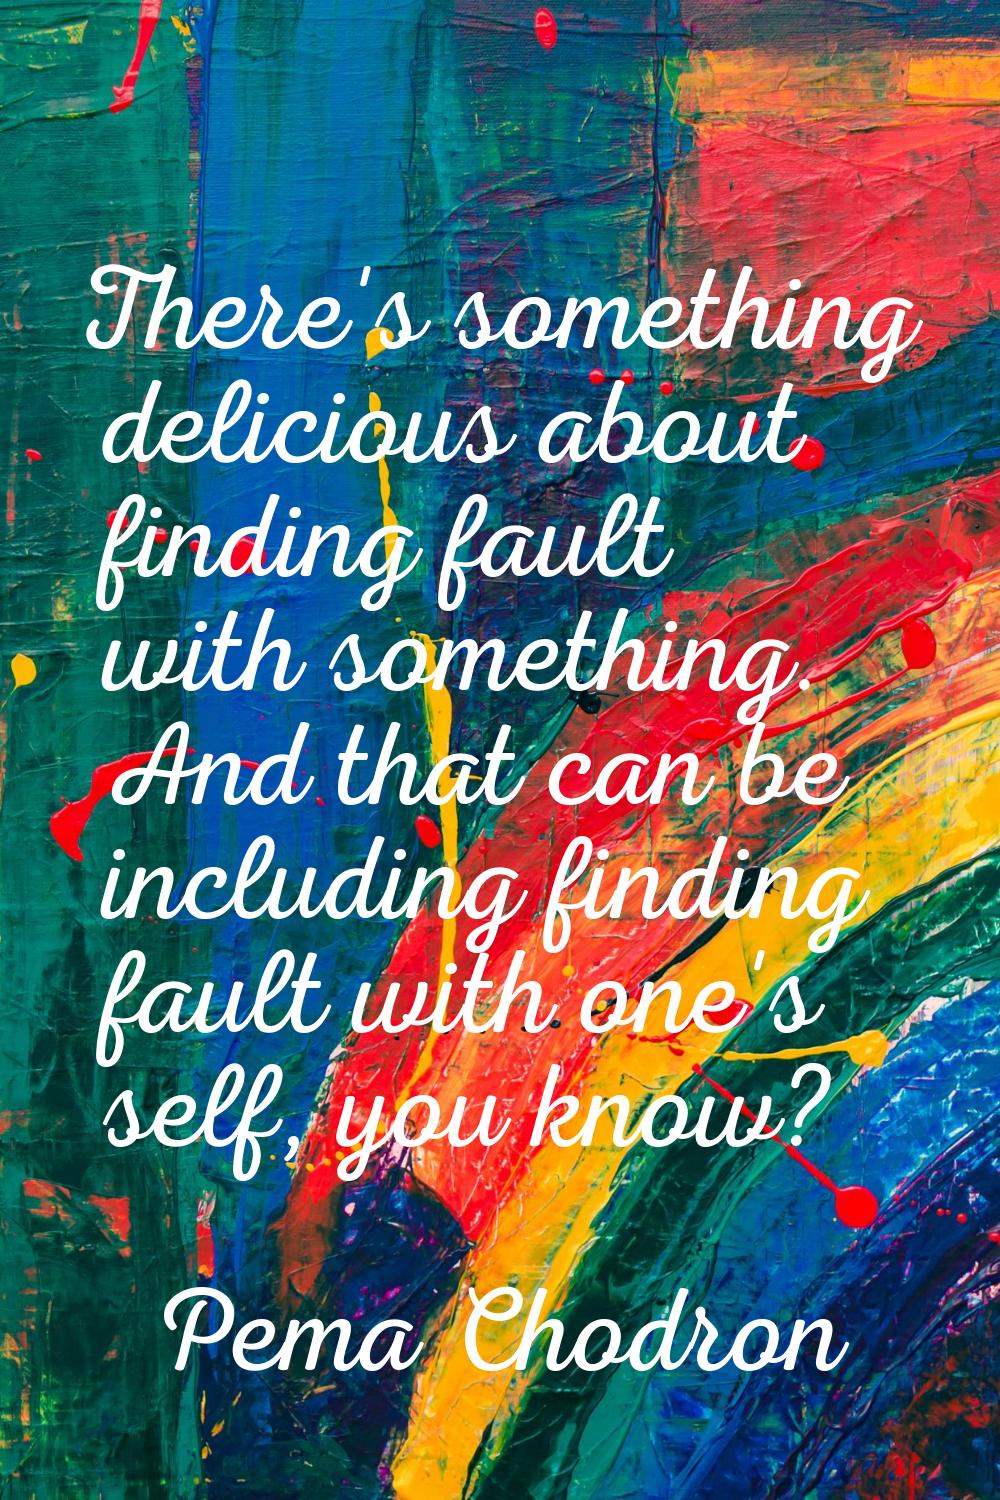 There's something delicious about finding fault with something. And that can be including finding f